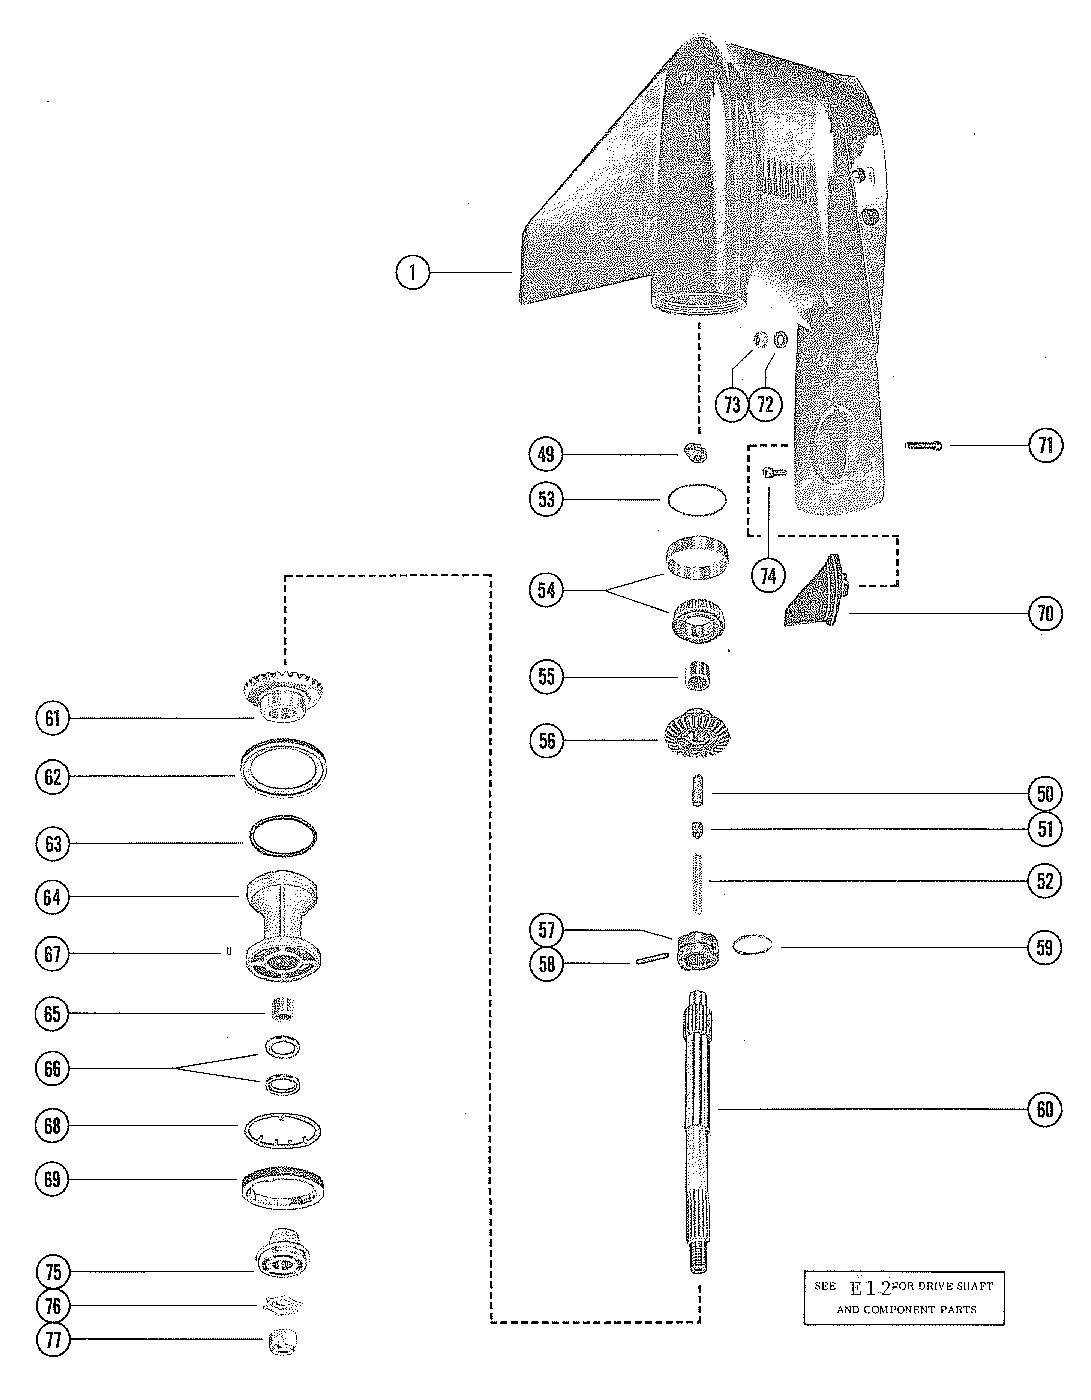 MARINER 115 HORSEPOWER GEAR HOUSING ASSEMBLY, COMPLETE (PAGE 2)